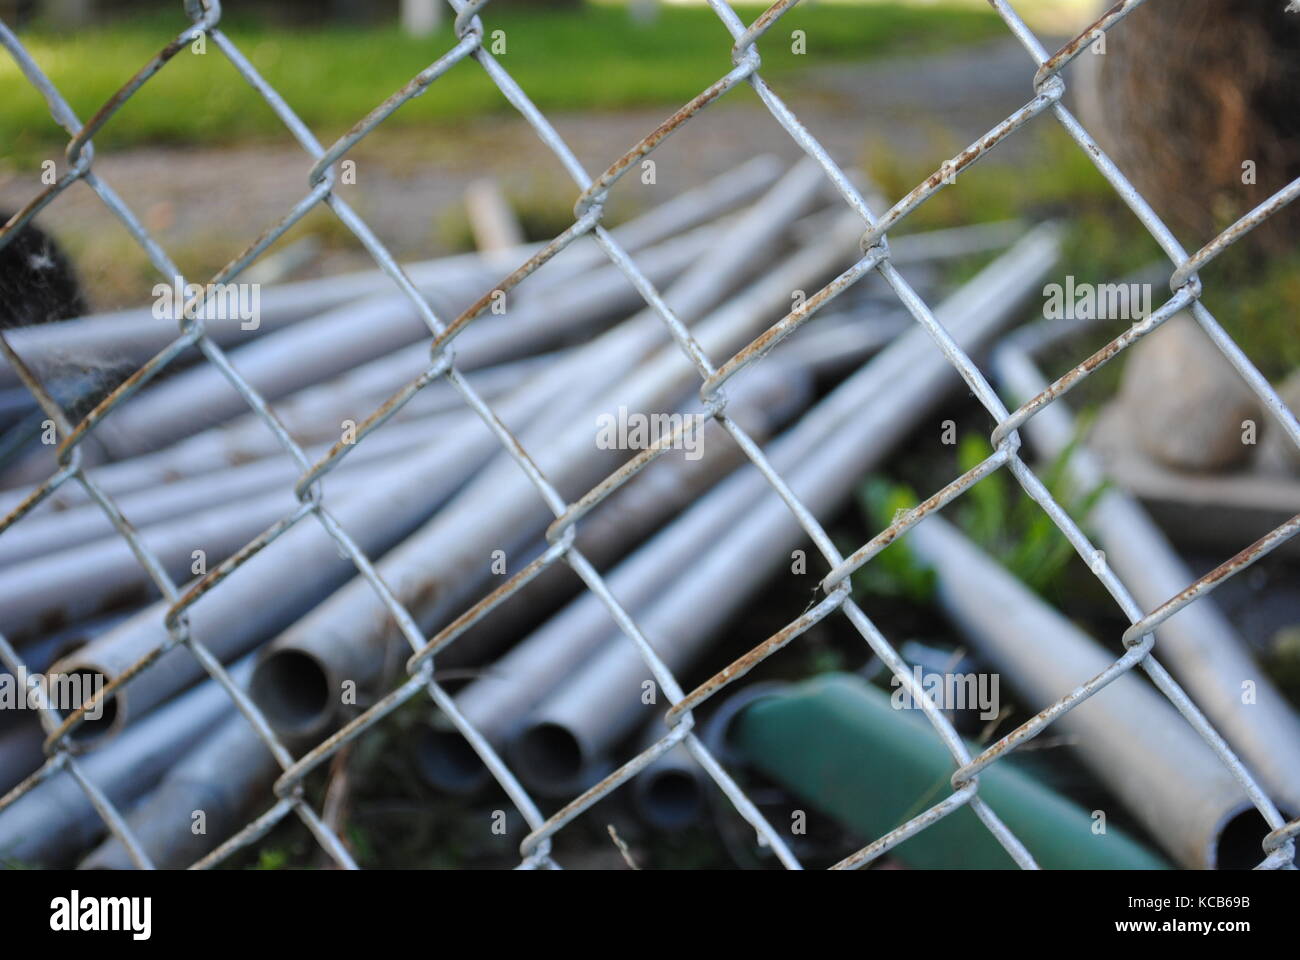 https://c8.alamy.com/comp/KCB69B/fence-poles-on-the-other-side-of-a-fence-KCB69B.jpg